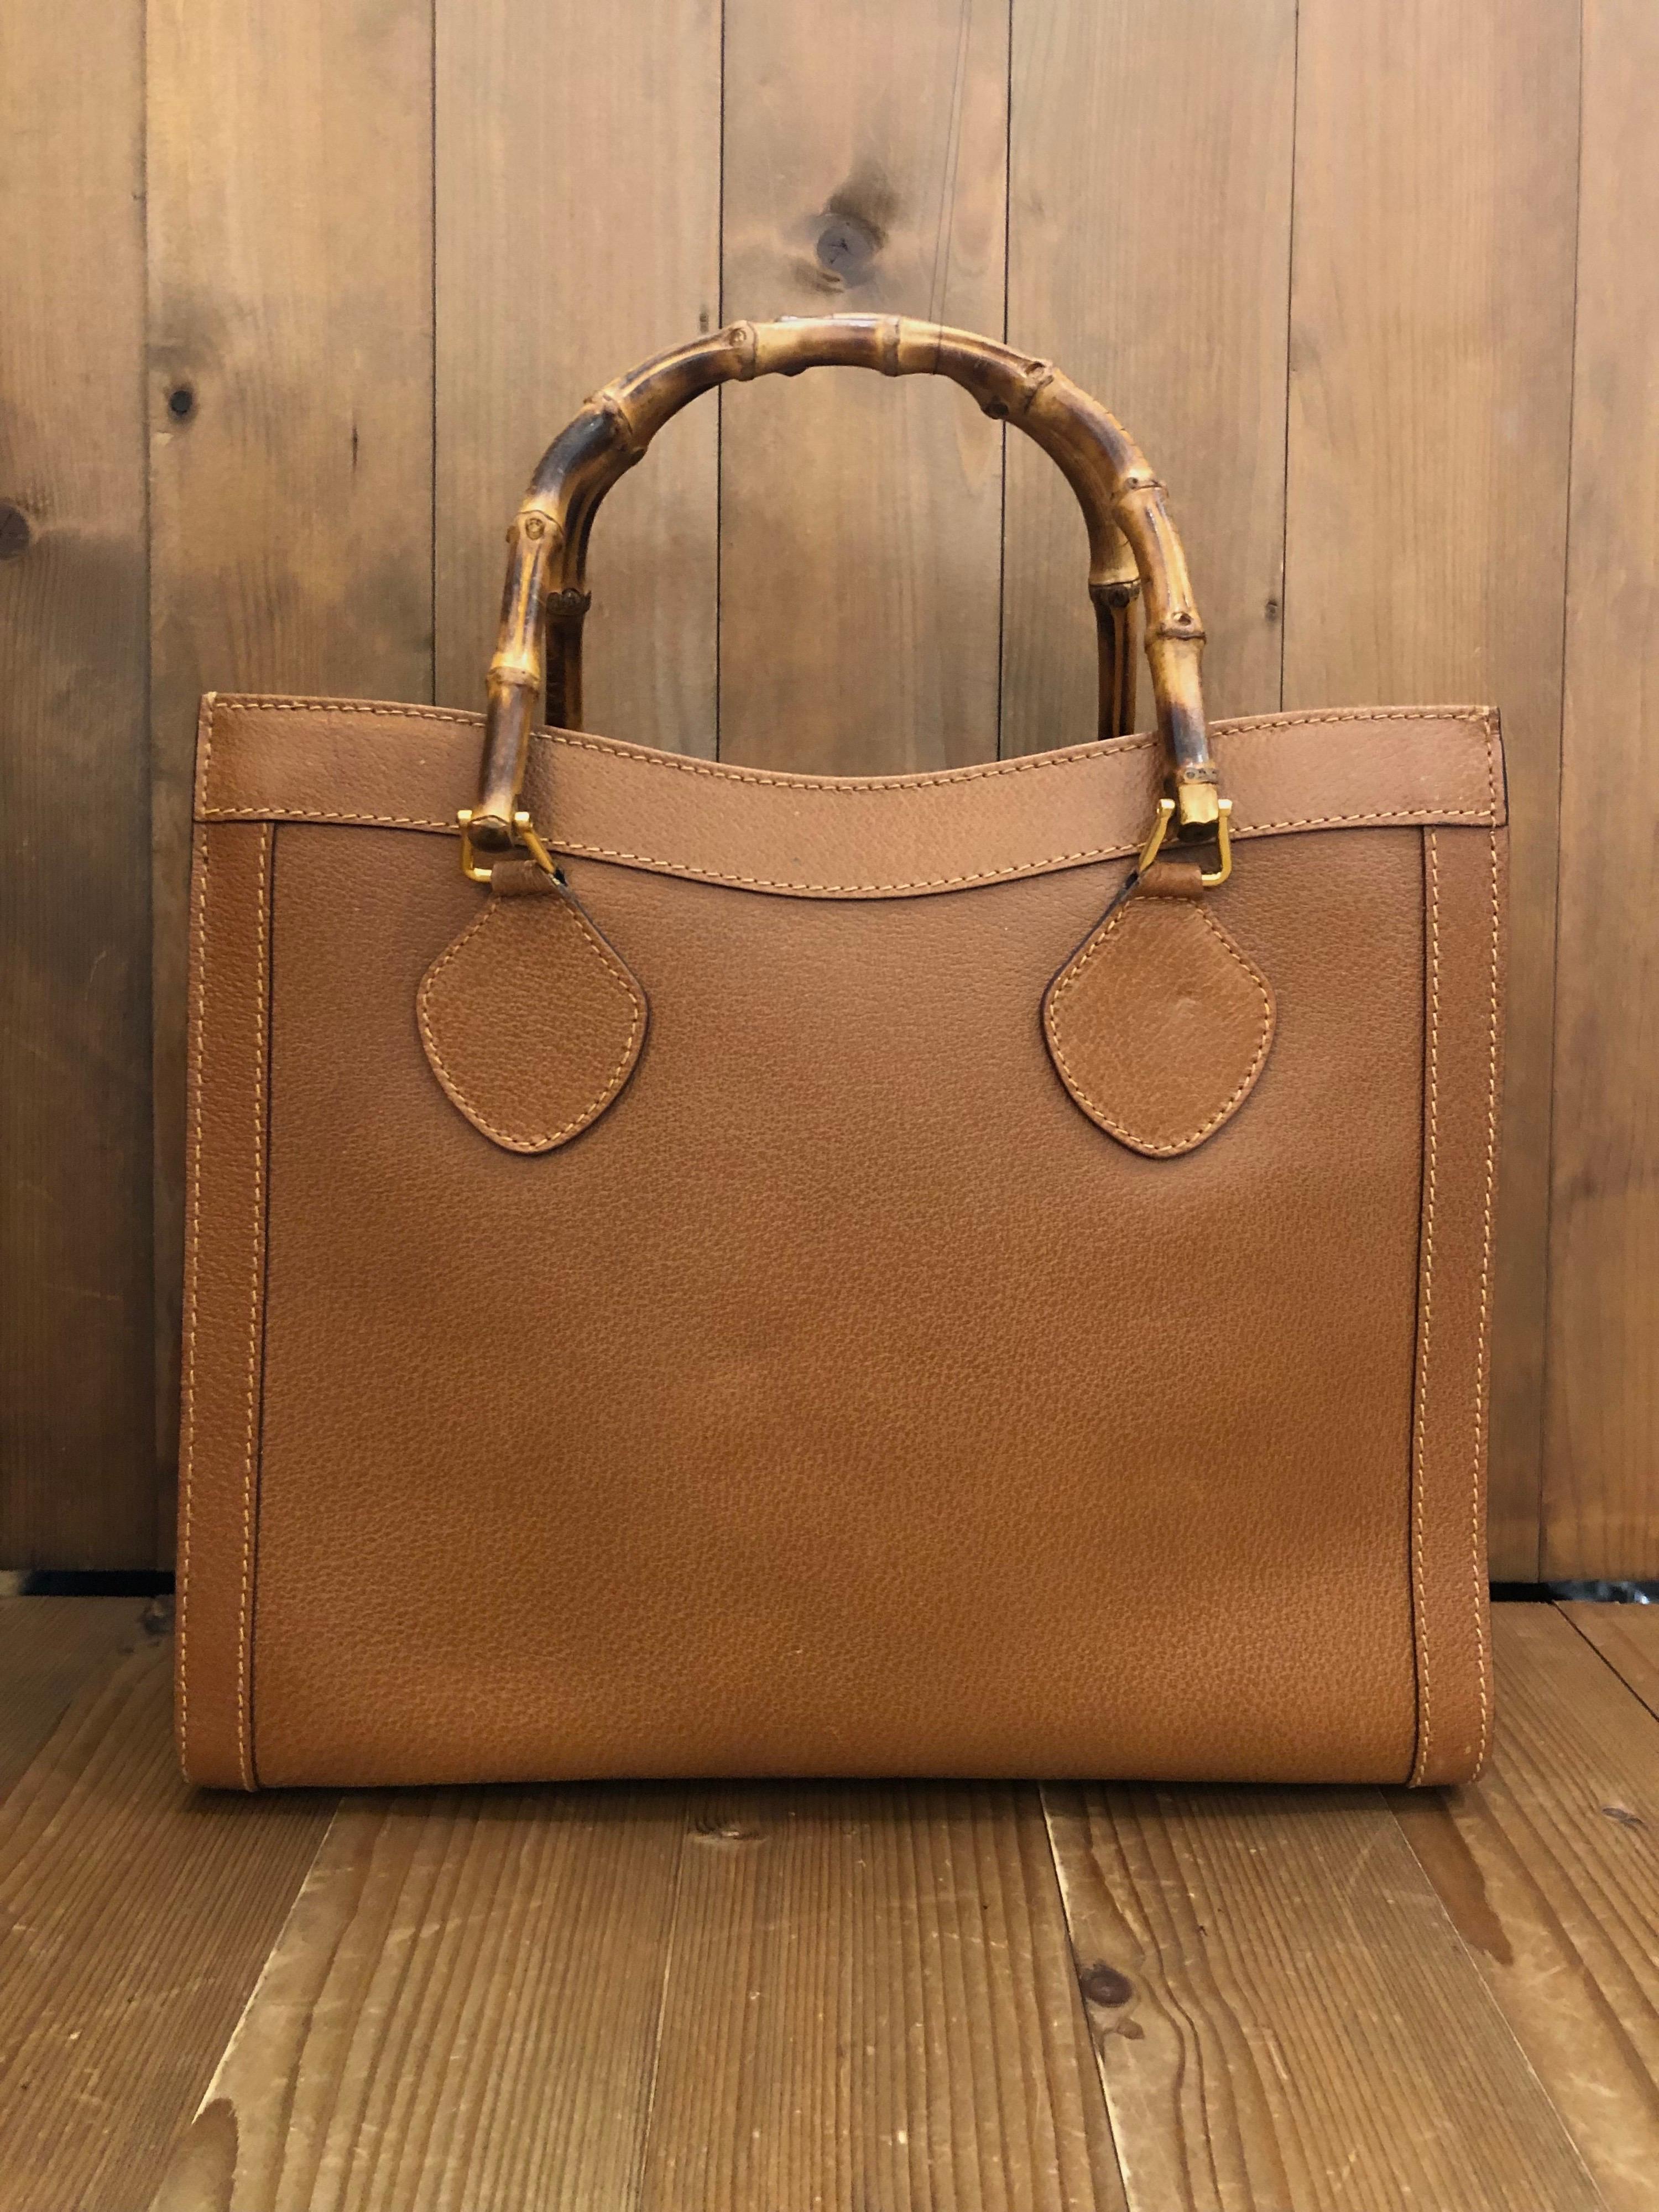 1990s Gucci bamboo tote in brown leather. The Bamboo tote is one of Princess Diana's favorite purses. Gucci revamped this Bamboo tote in 2021 winter collection. Made in Italy. Measures 13 x 11 x 5.5 inches handle drop 5 inches. It features two main